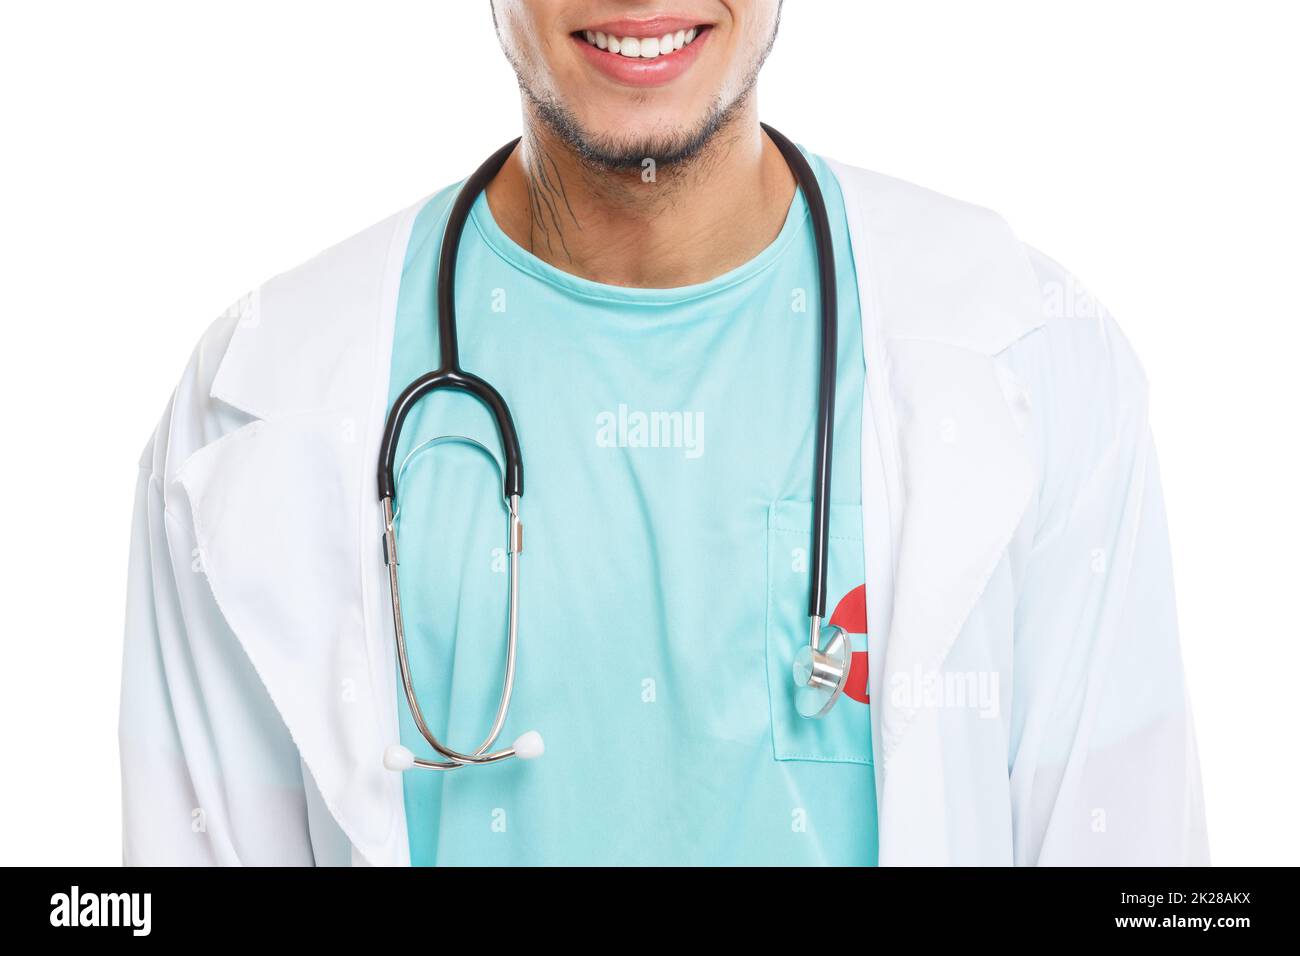 Young doctor smiling happy upper body occupation job isolated Stock Photo